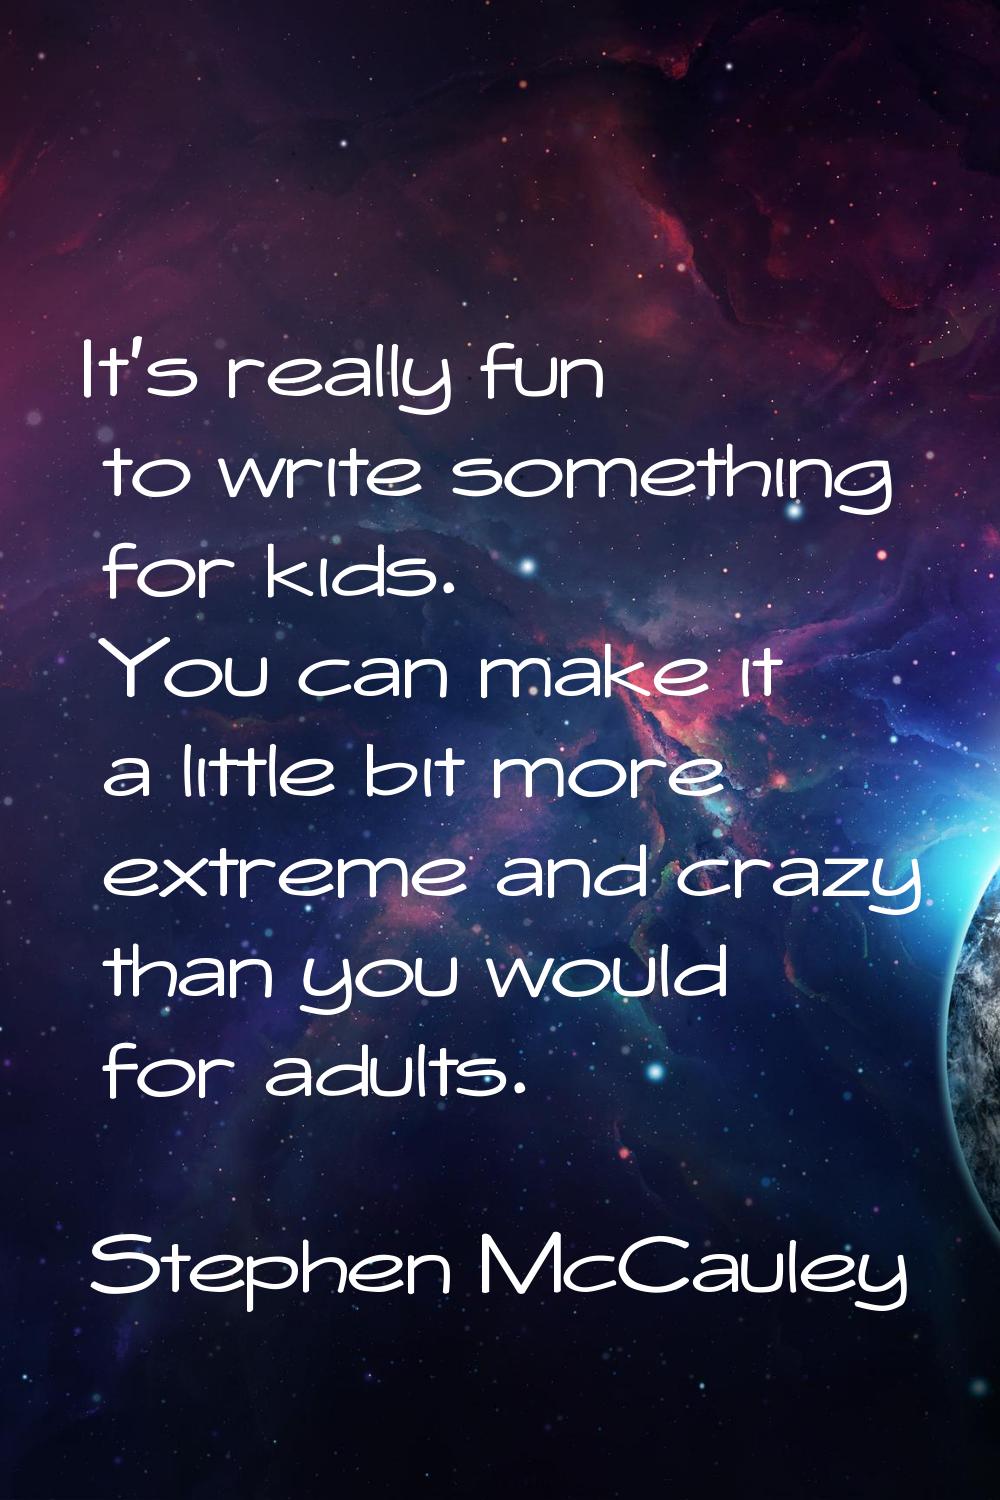 It's really fun to write something for kids. You can make it a little bit more extreme and crazy th